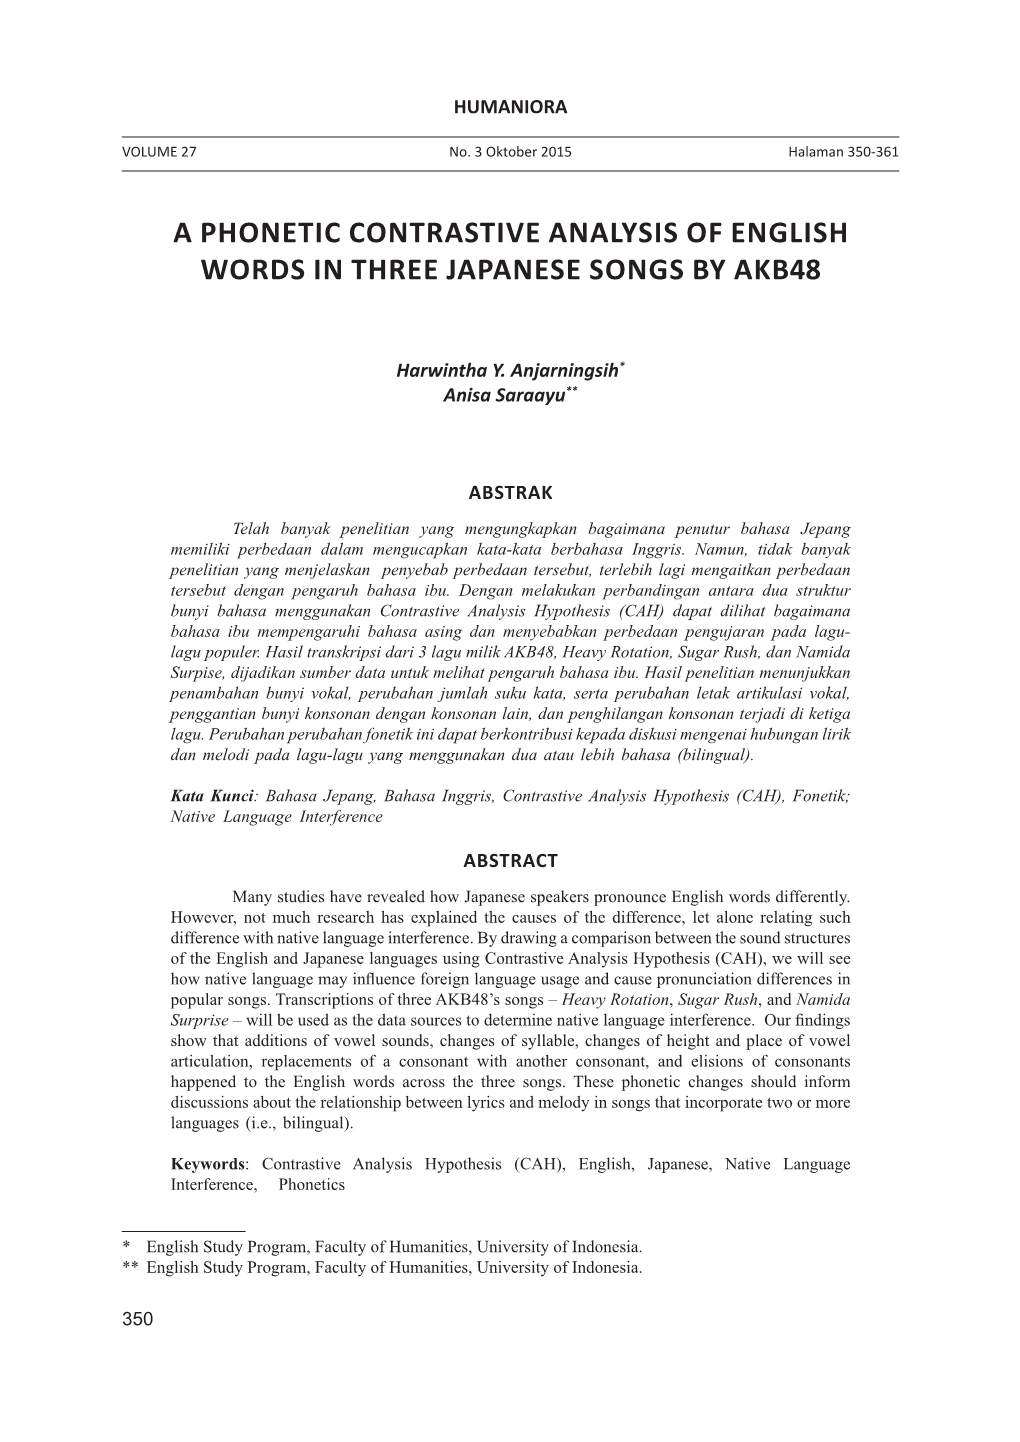 A Phonetic Contrastive Analysis of English Words in Three Japanese Songs by Akb48